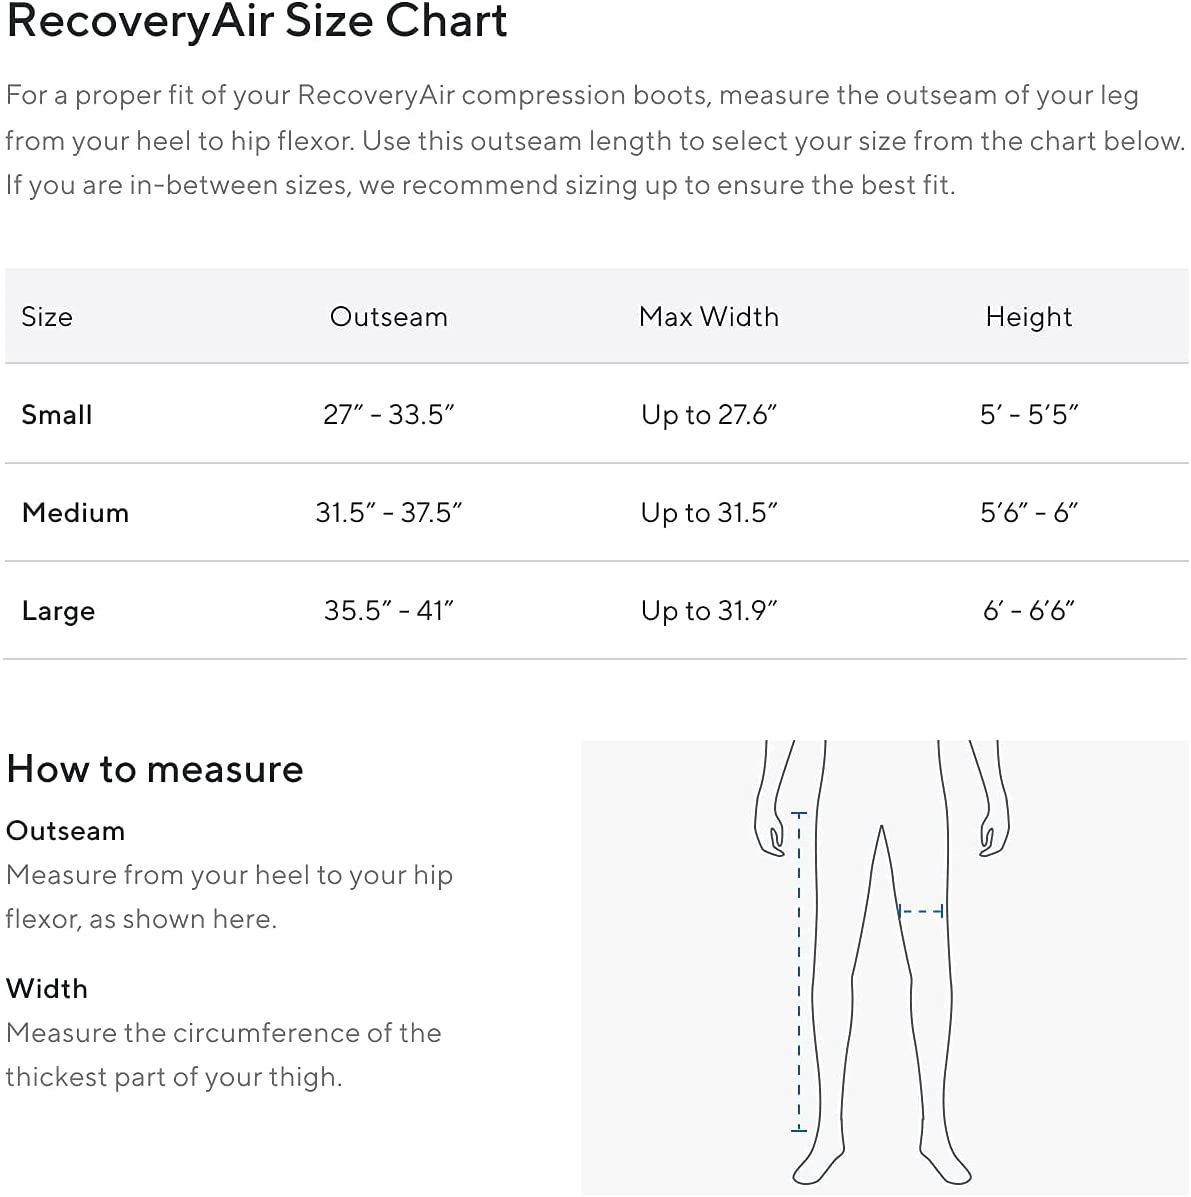 DISCDISCTherabody - RecoveryAir Compression System